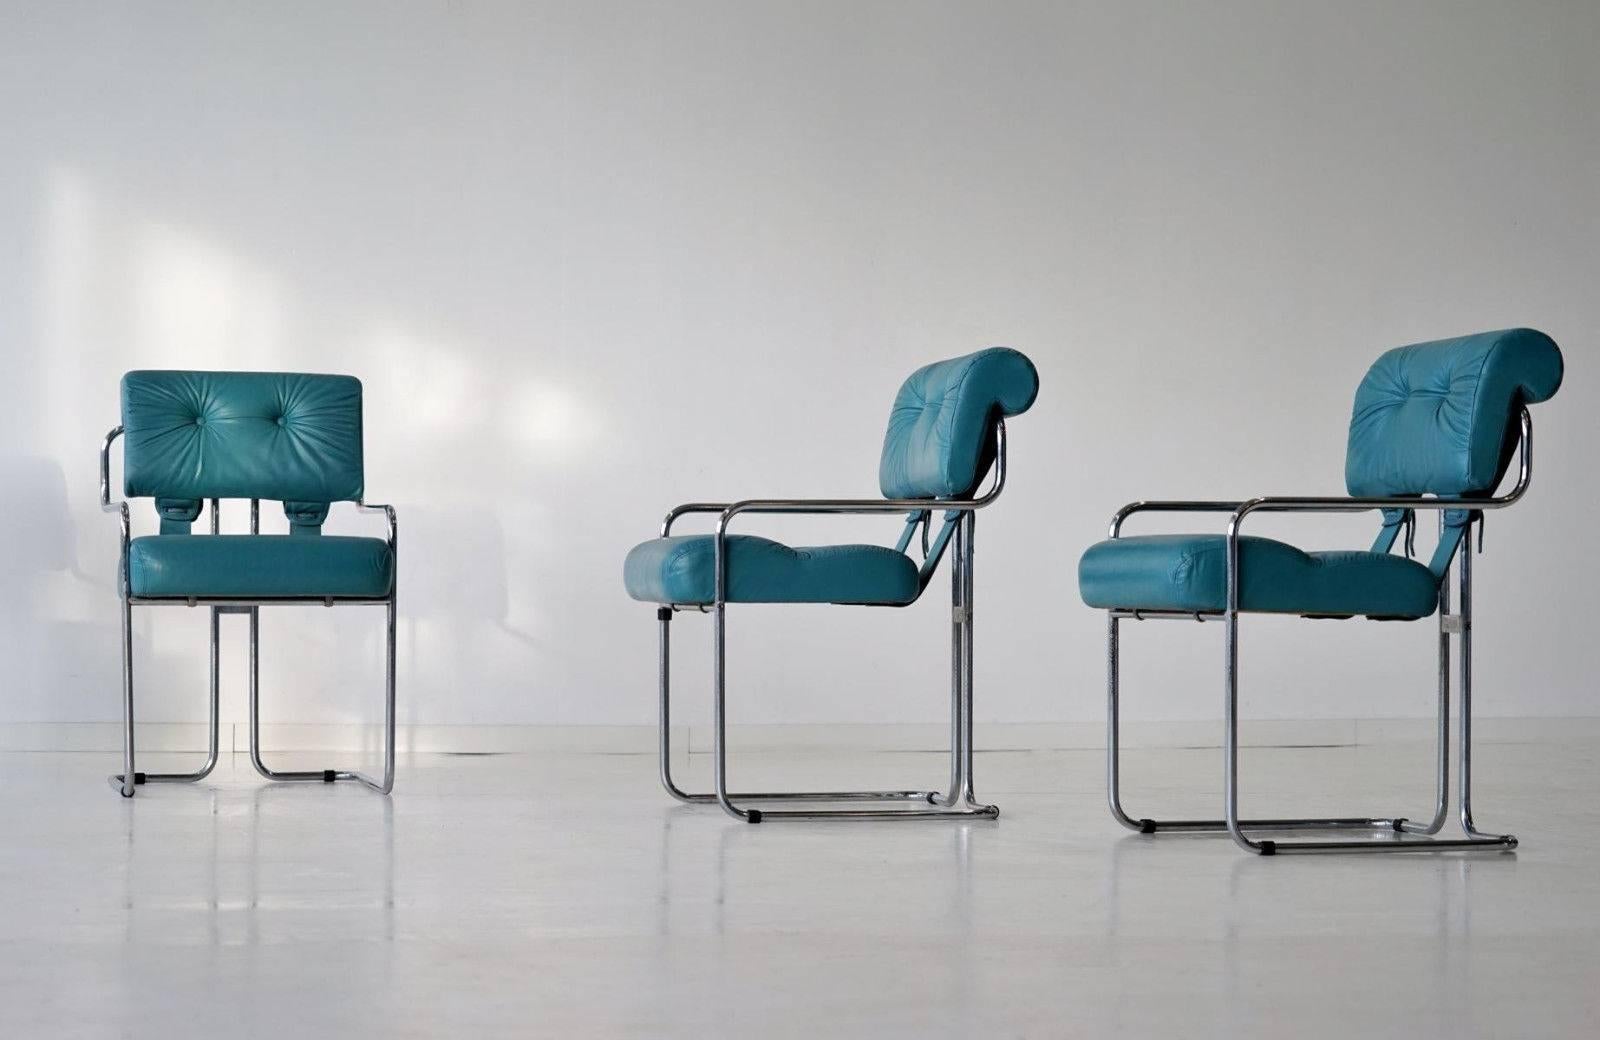 Set dining chair by Faleschini Guido Pace Tucroma chrome tubular steel leather cantilever.

The tubular steel chairs are particularly comfortable. The rare and beautiful color is an absolute eyecather.


